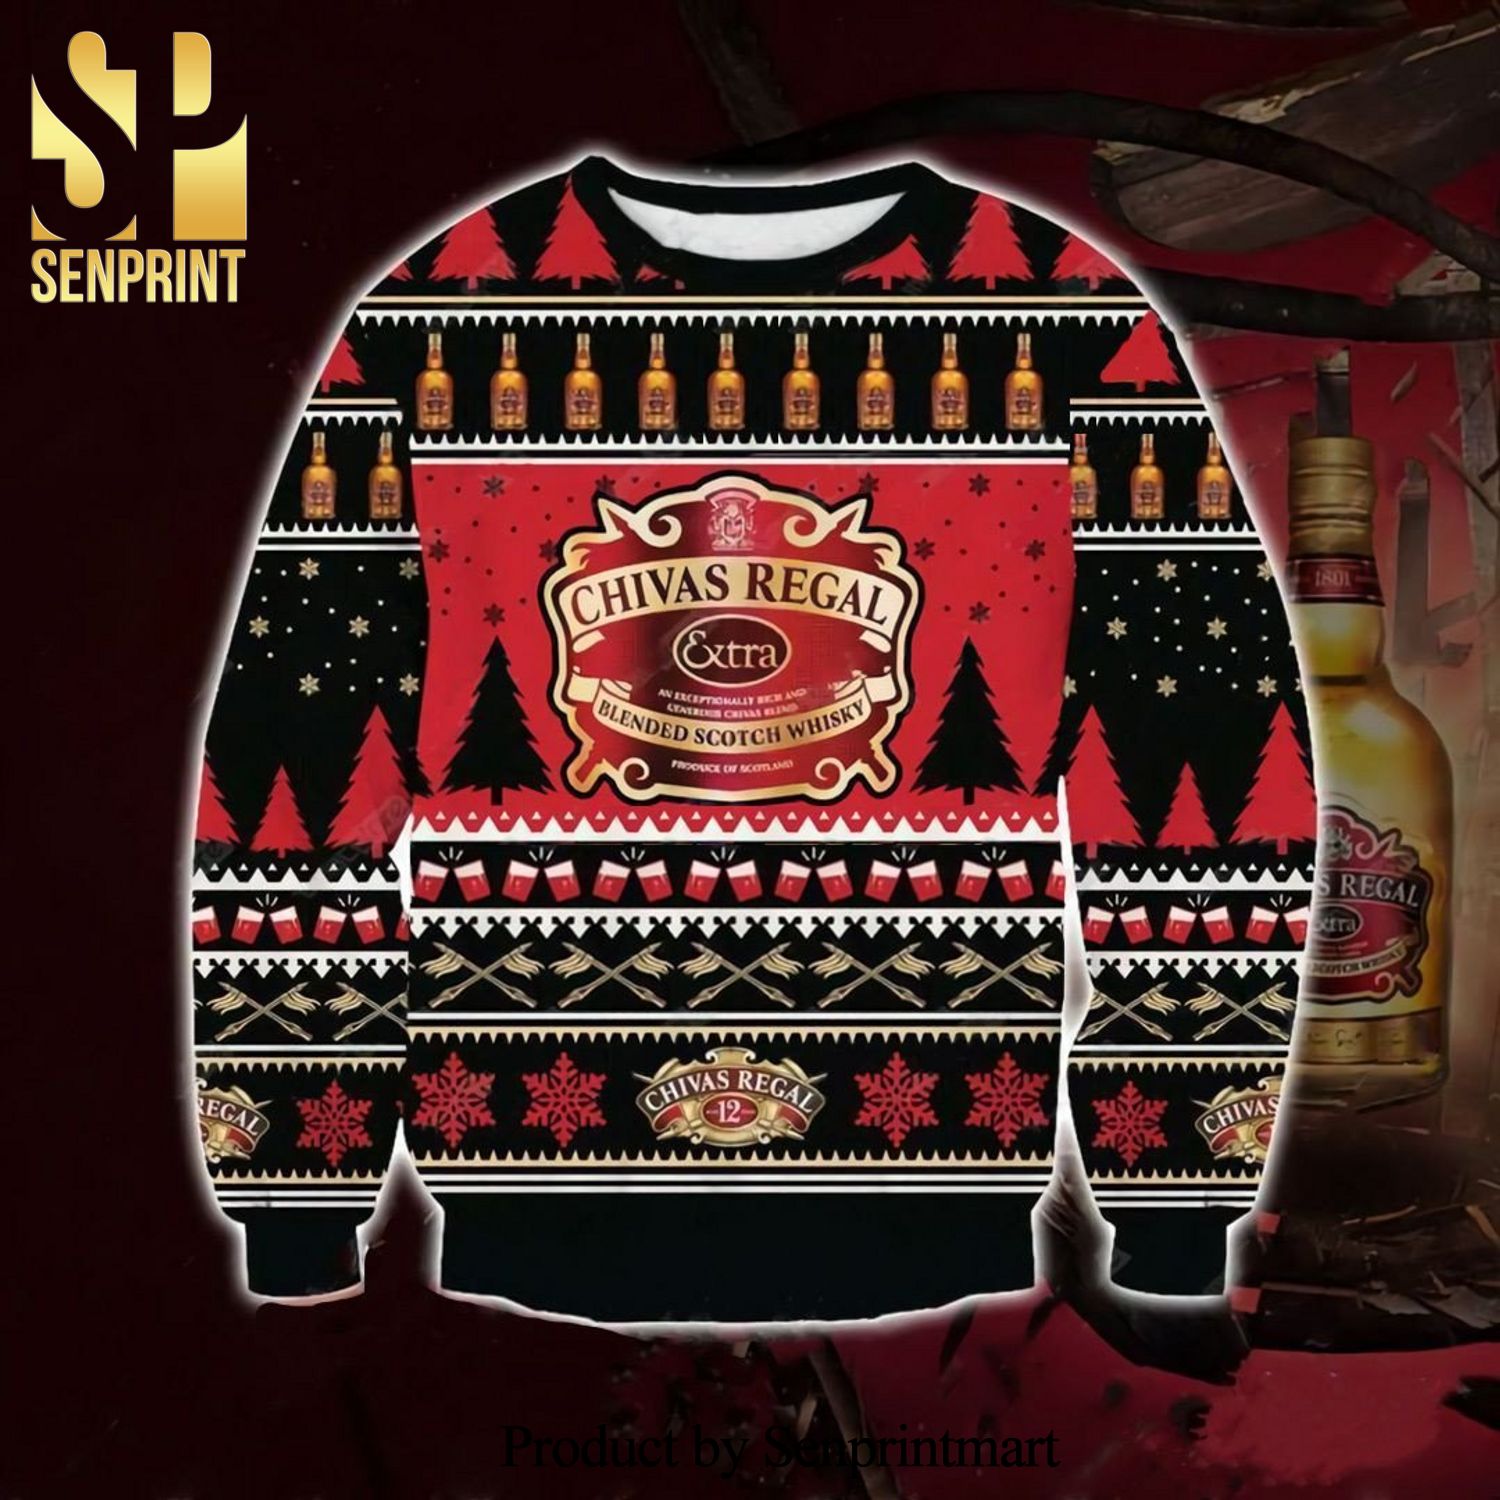 Chivas Regal Blended Scotch WhiskyKnitted Ugly Christmas Sweater